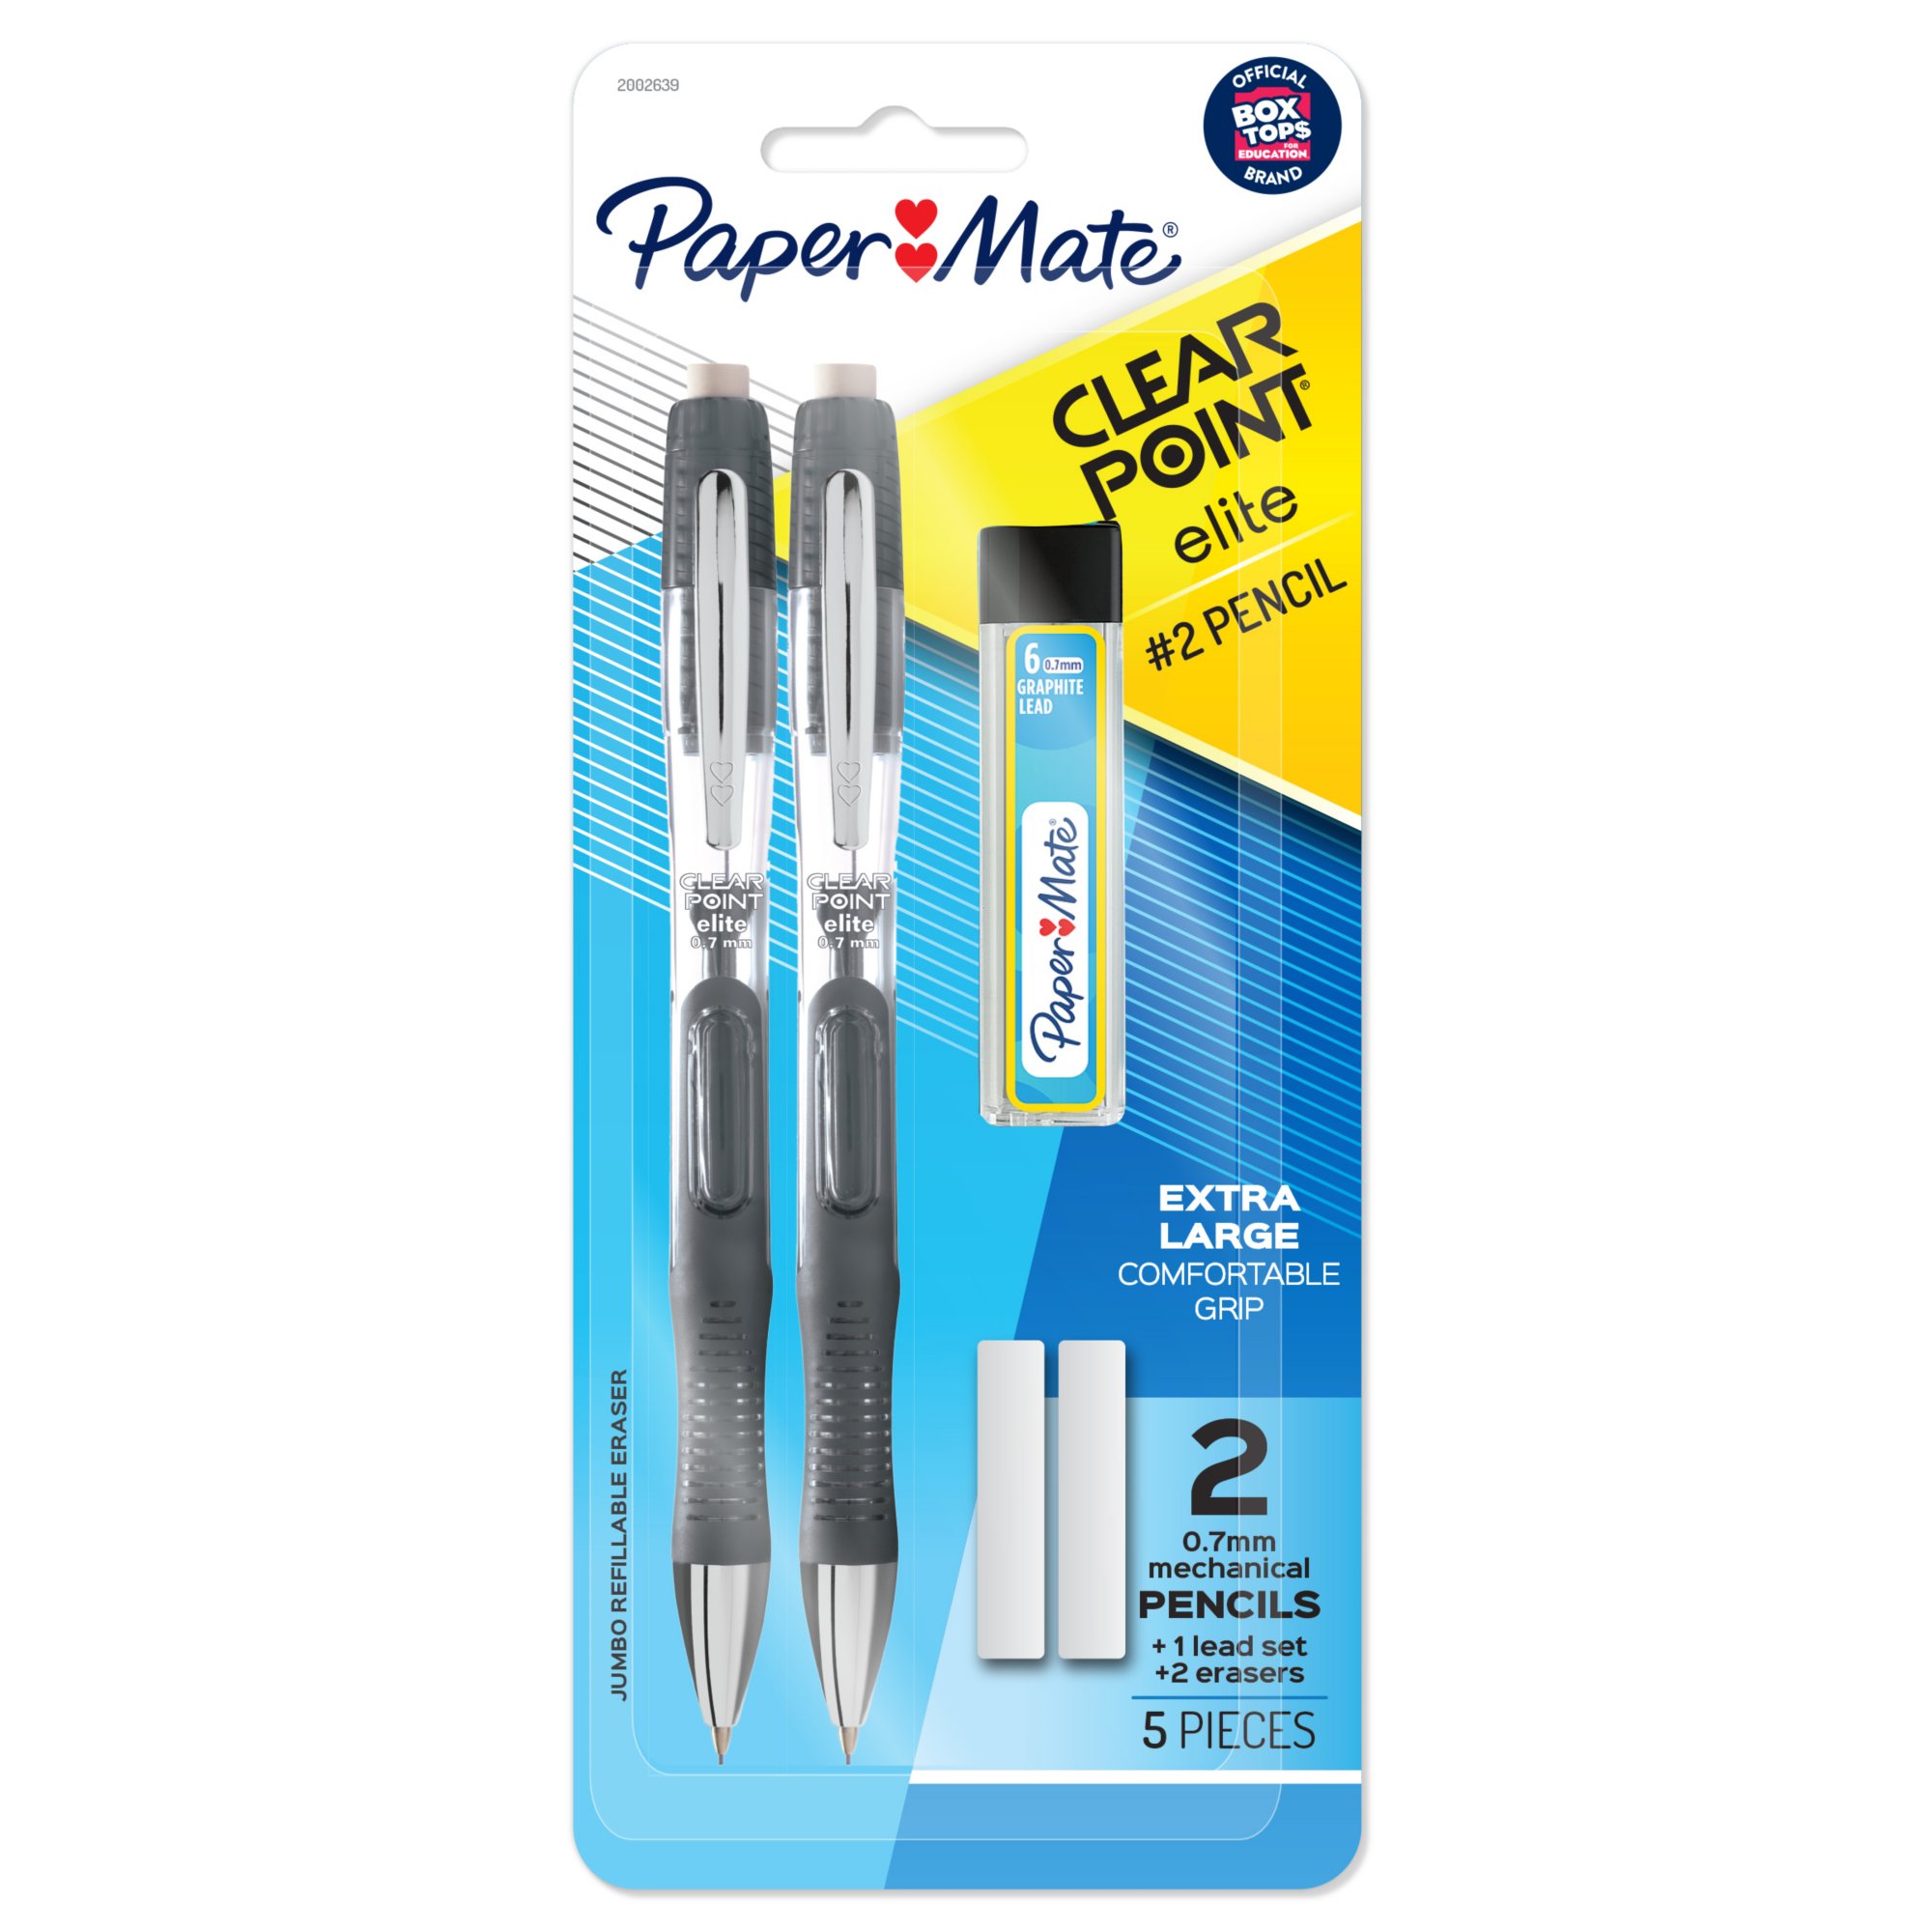  Paper Mate Clearpoint Pencils, HB #2 Lead (0.7mm